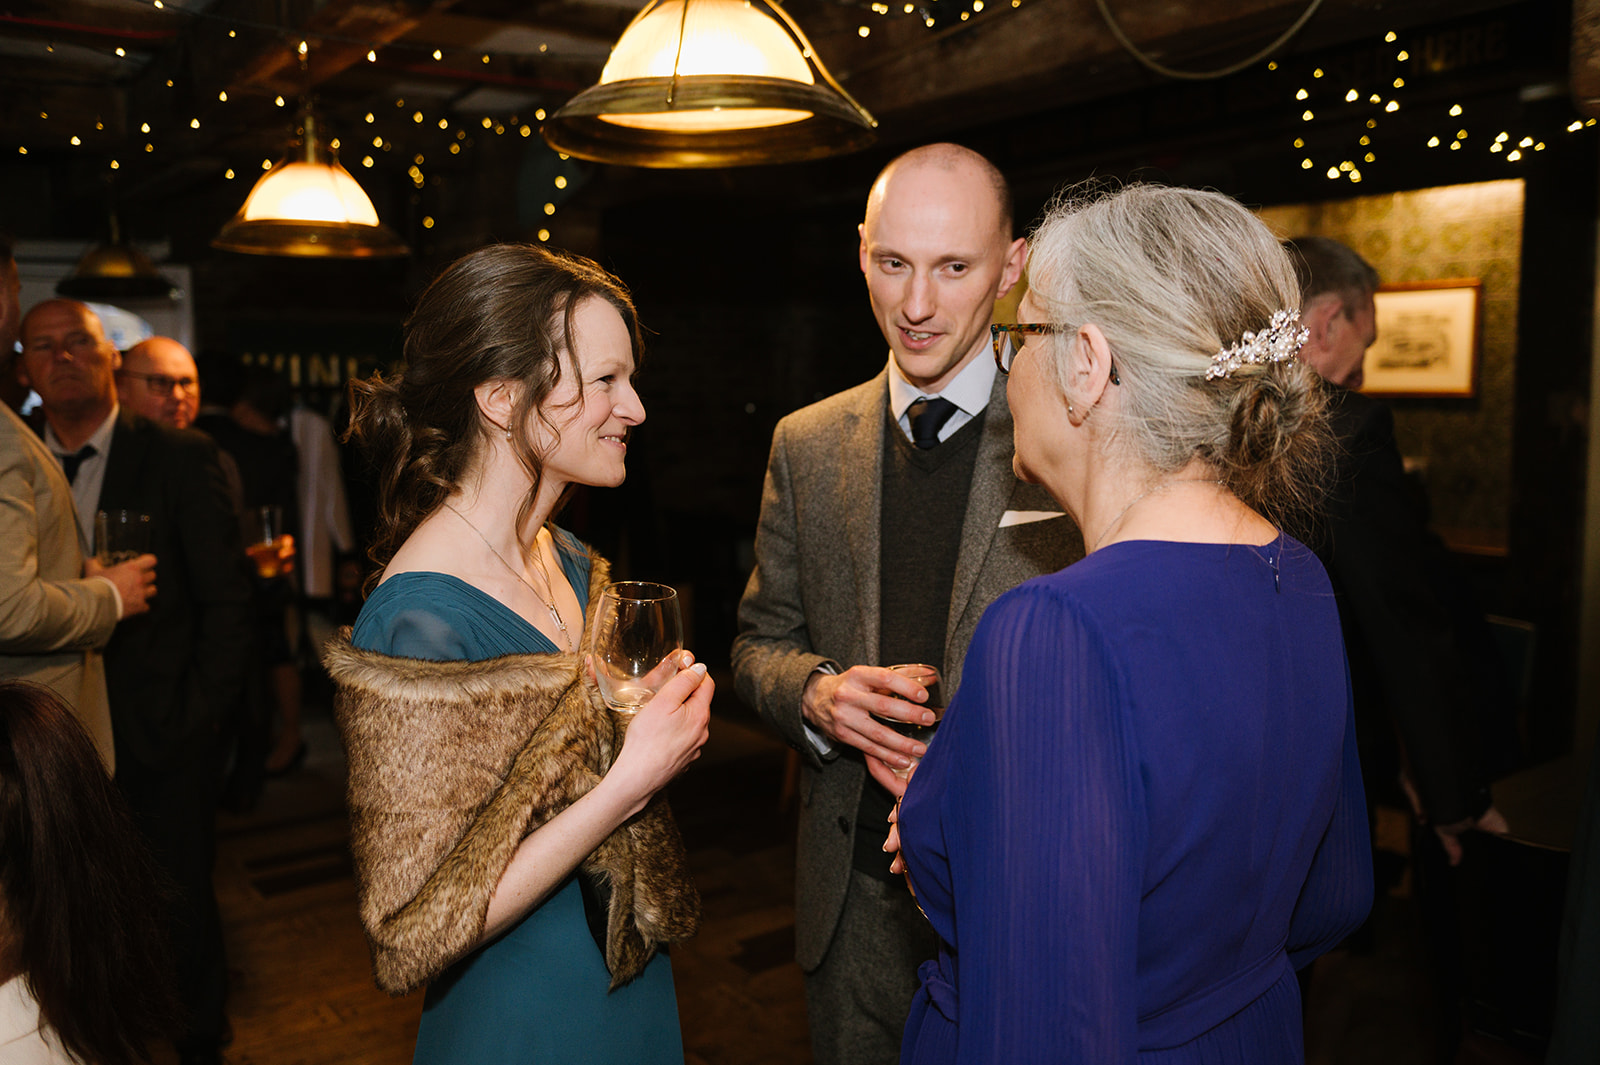 Guests at the Dickens Inn Central London Wedding